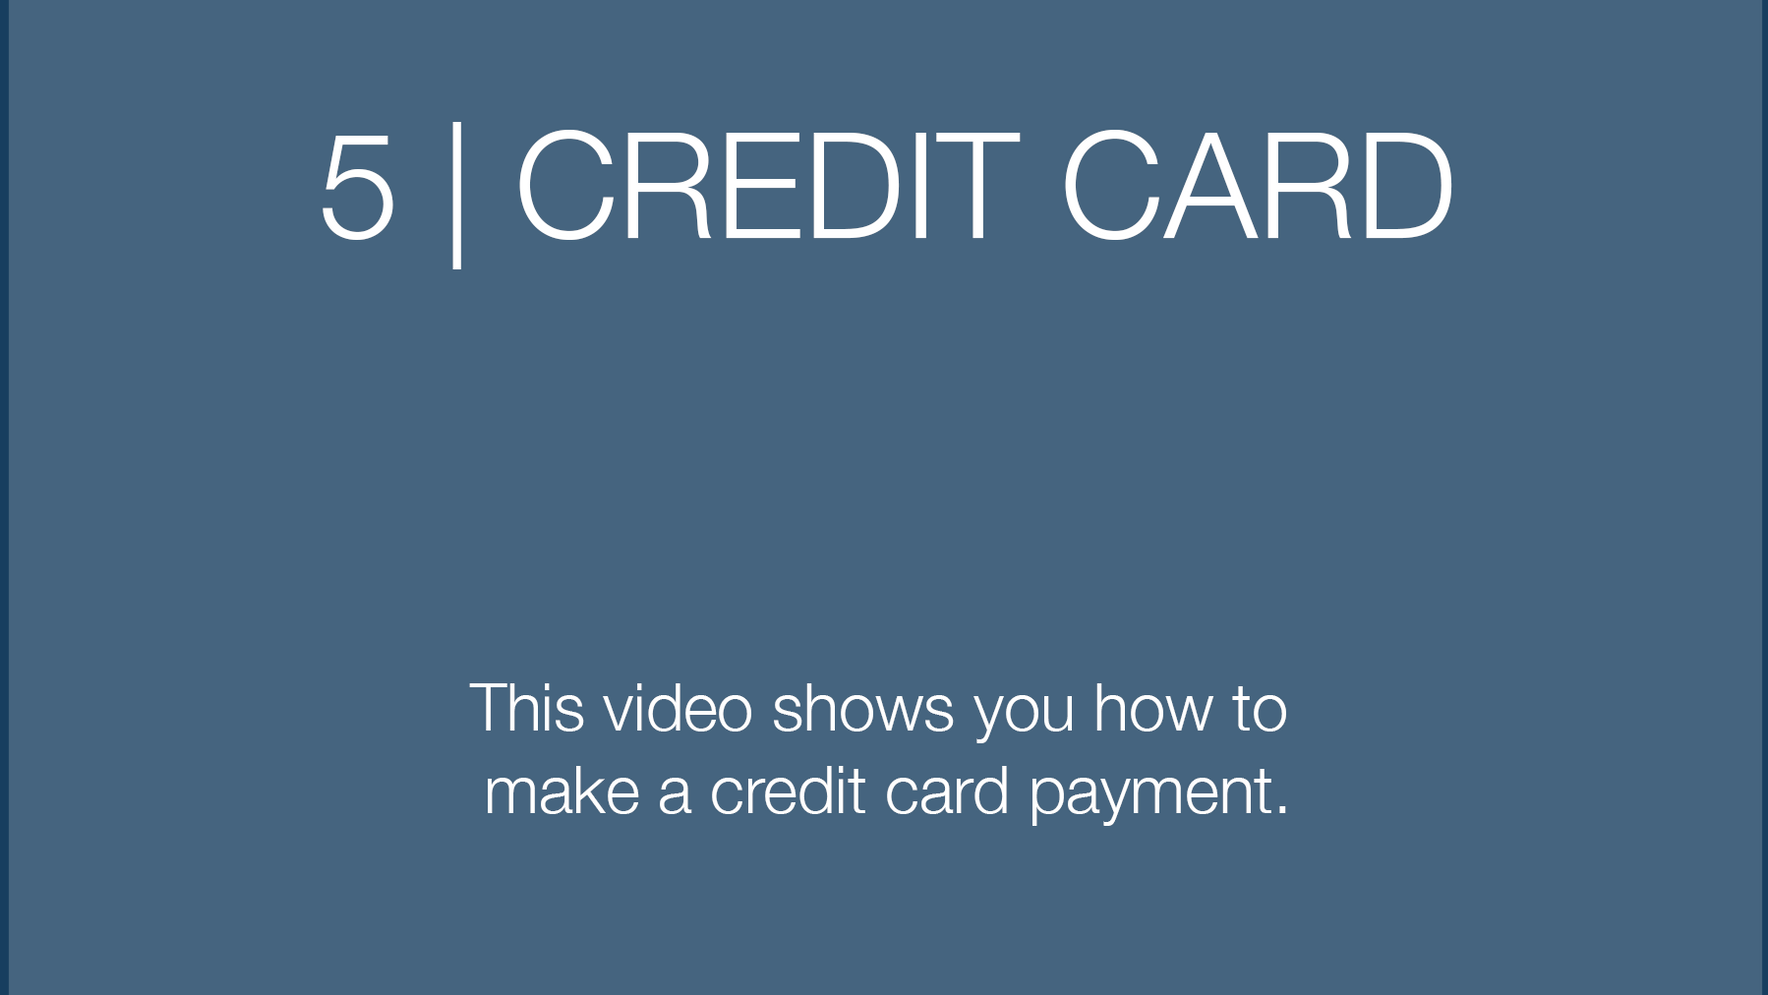 5 | HOW TO MAKE A CREDIT CARD PAYMENT